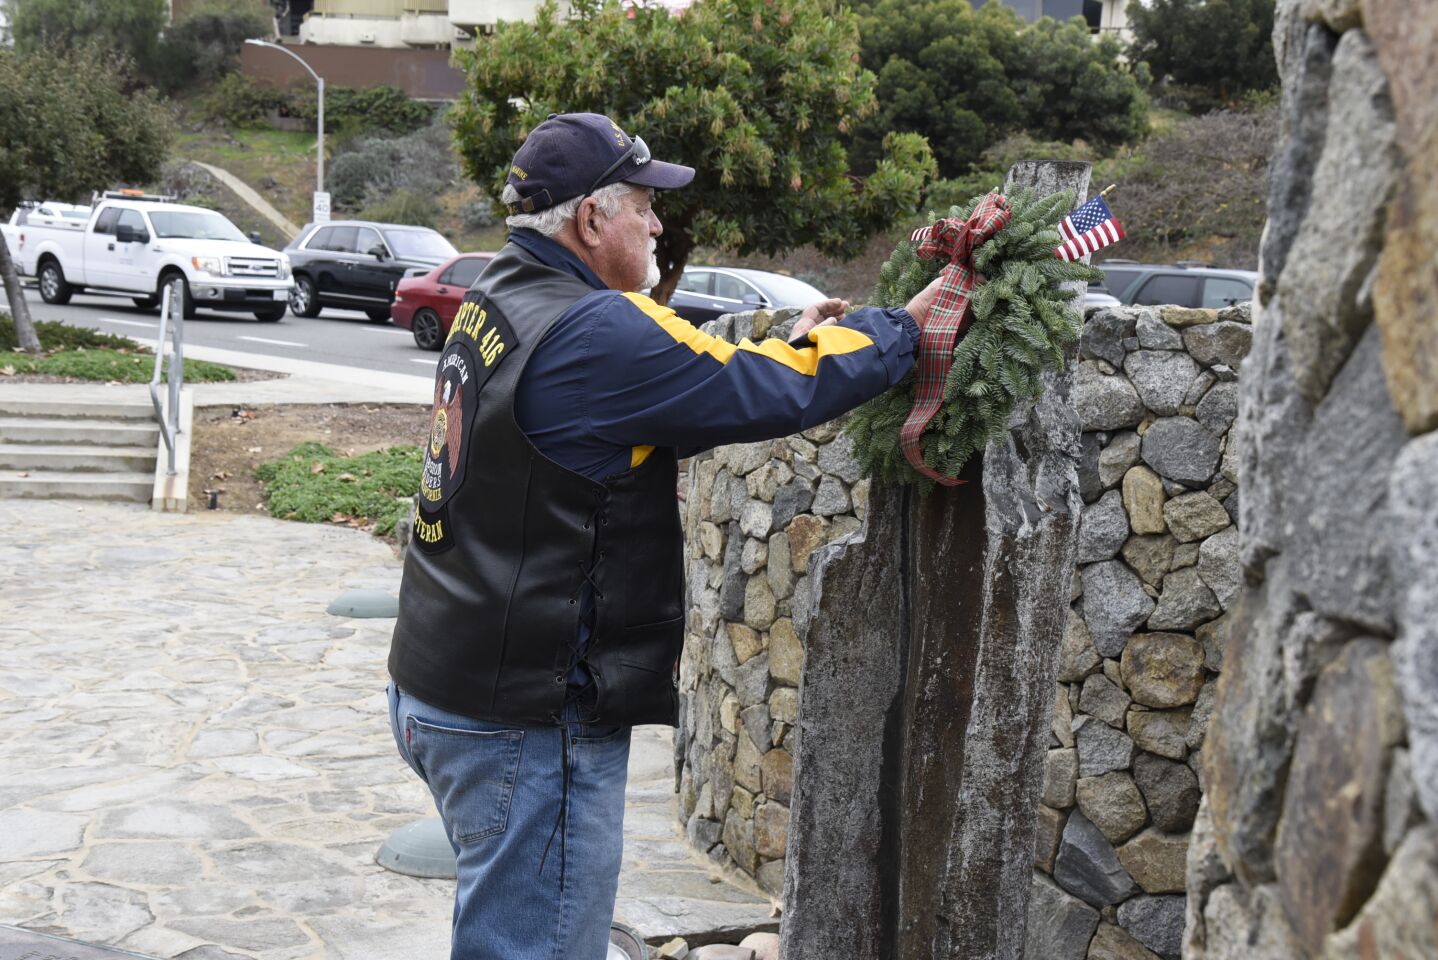 Lane Post lays the wreath honoring those lost at Pearl Harbor on Dec. 7, 1941